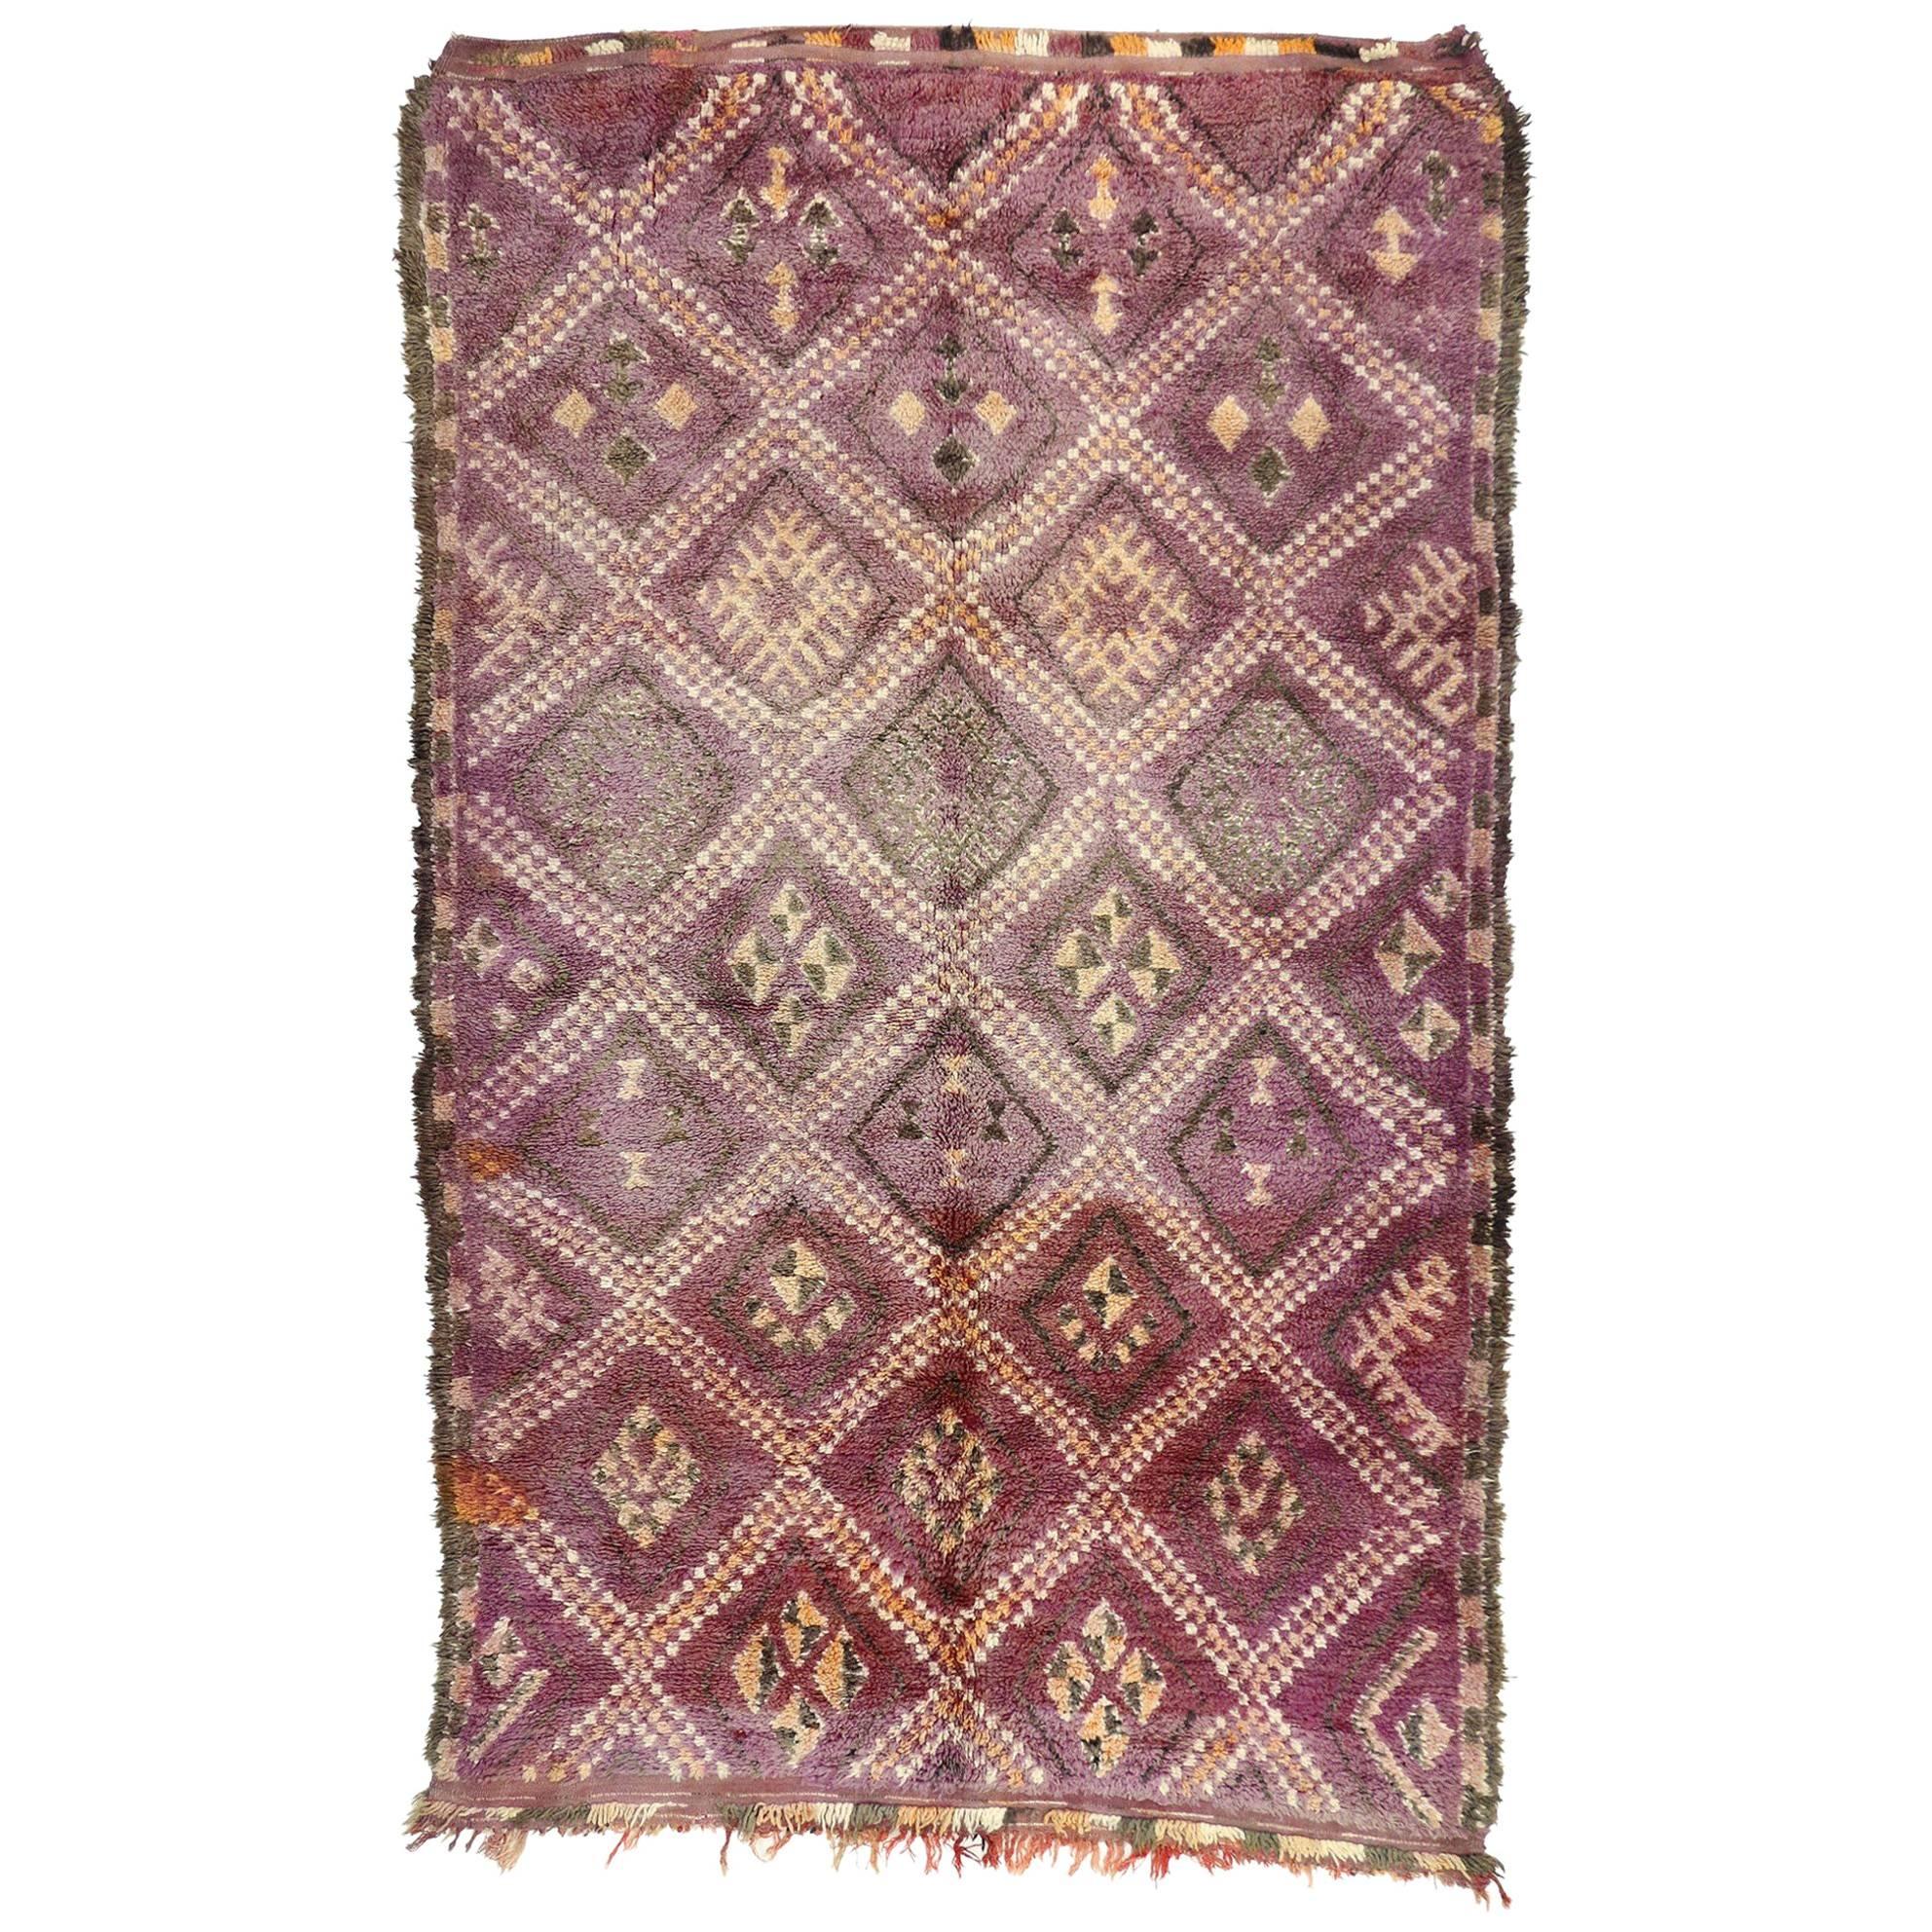 Vintage Berber Moroccan Rug with Post-Modern Memphis Bohemian Style